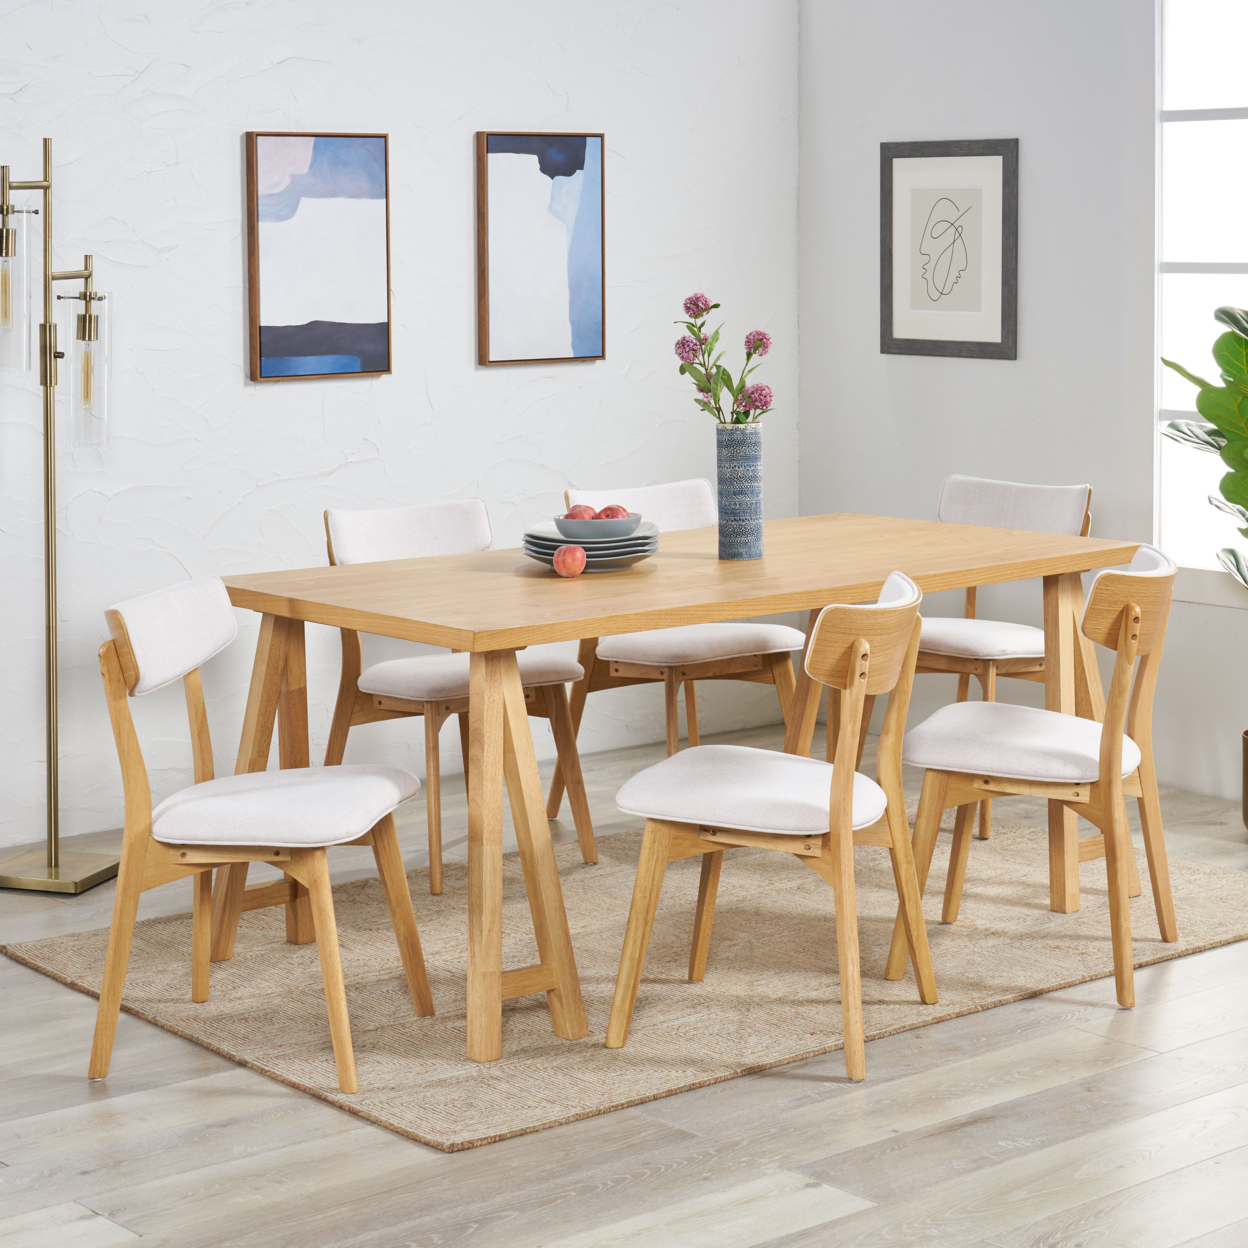 Turat Mid-Century Modern 7 Piece Dining Set With A-Frame Table - Natural Oak/dark Gray